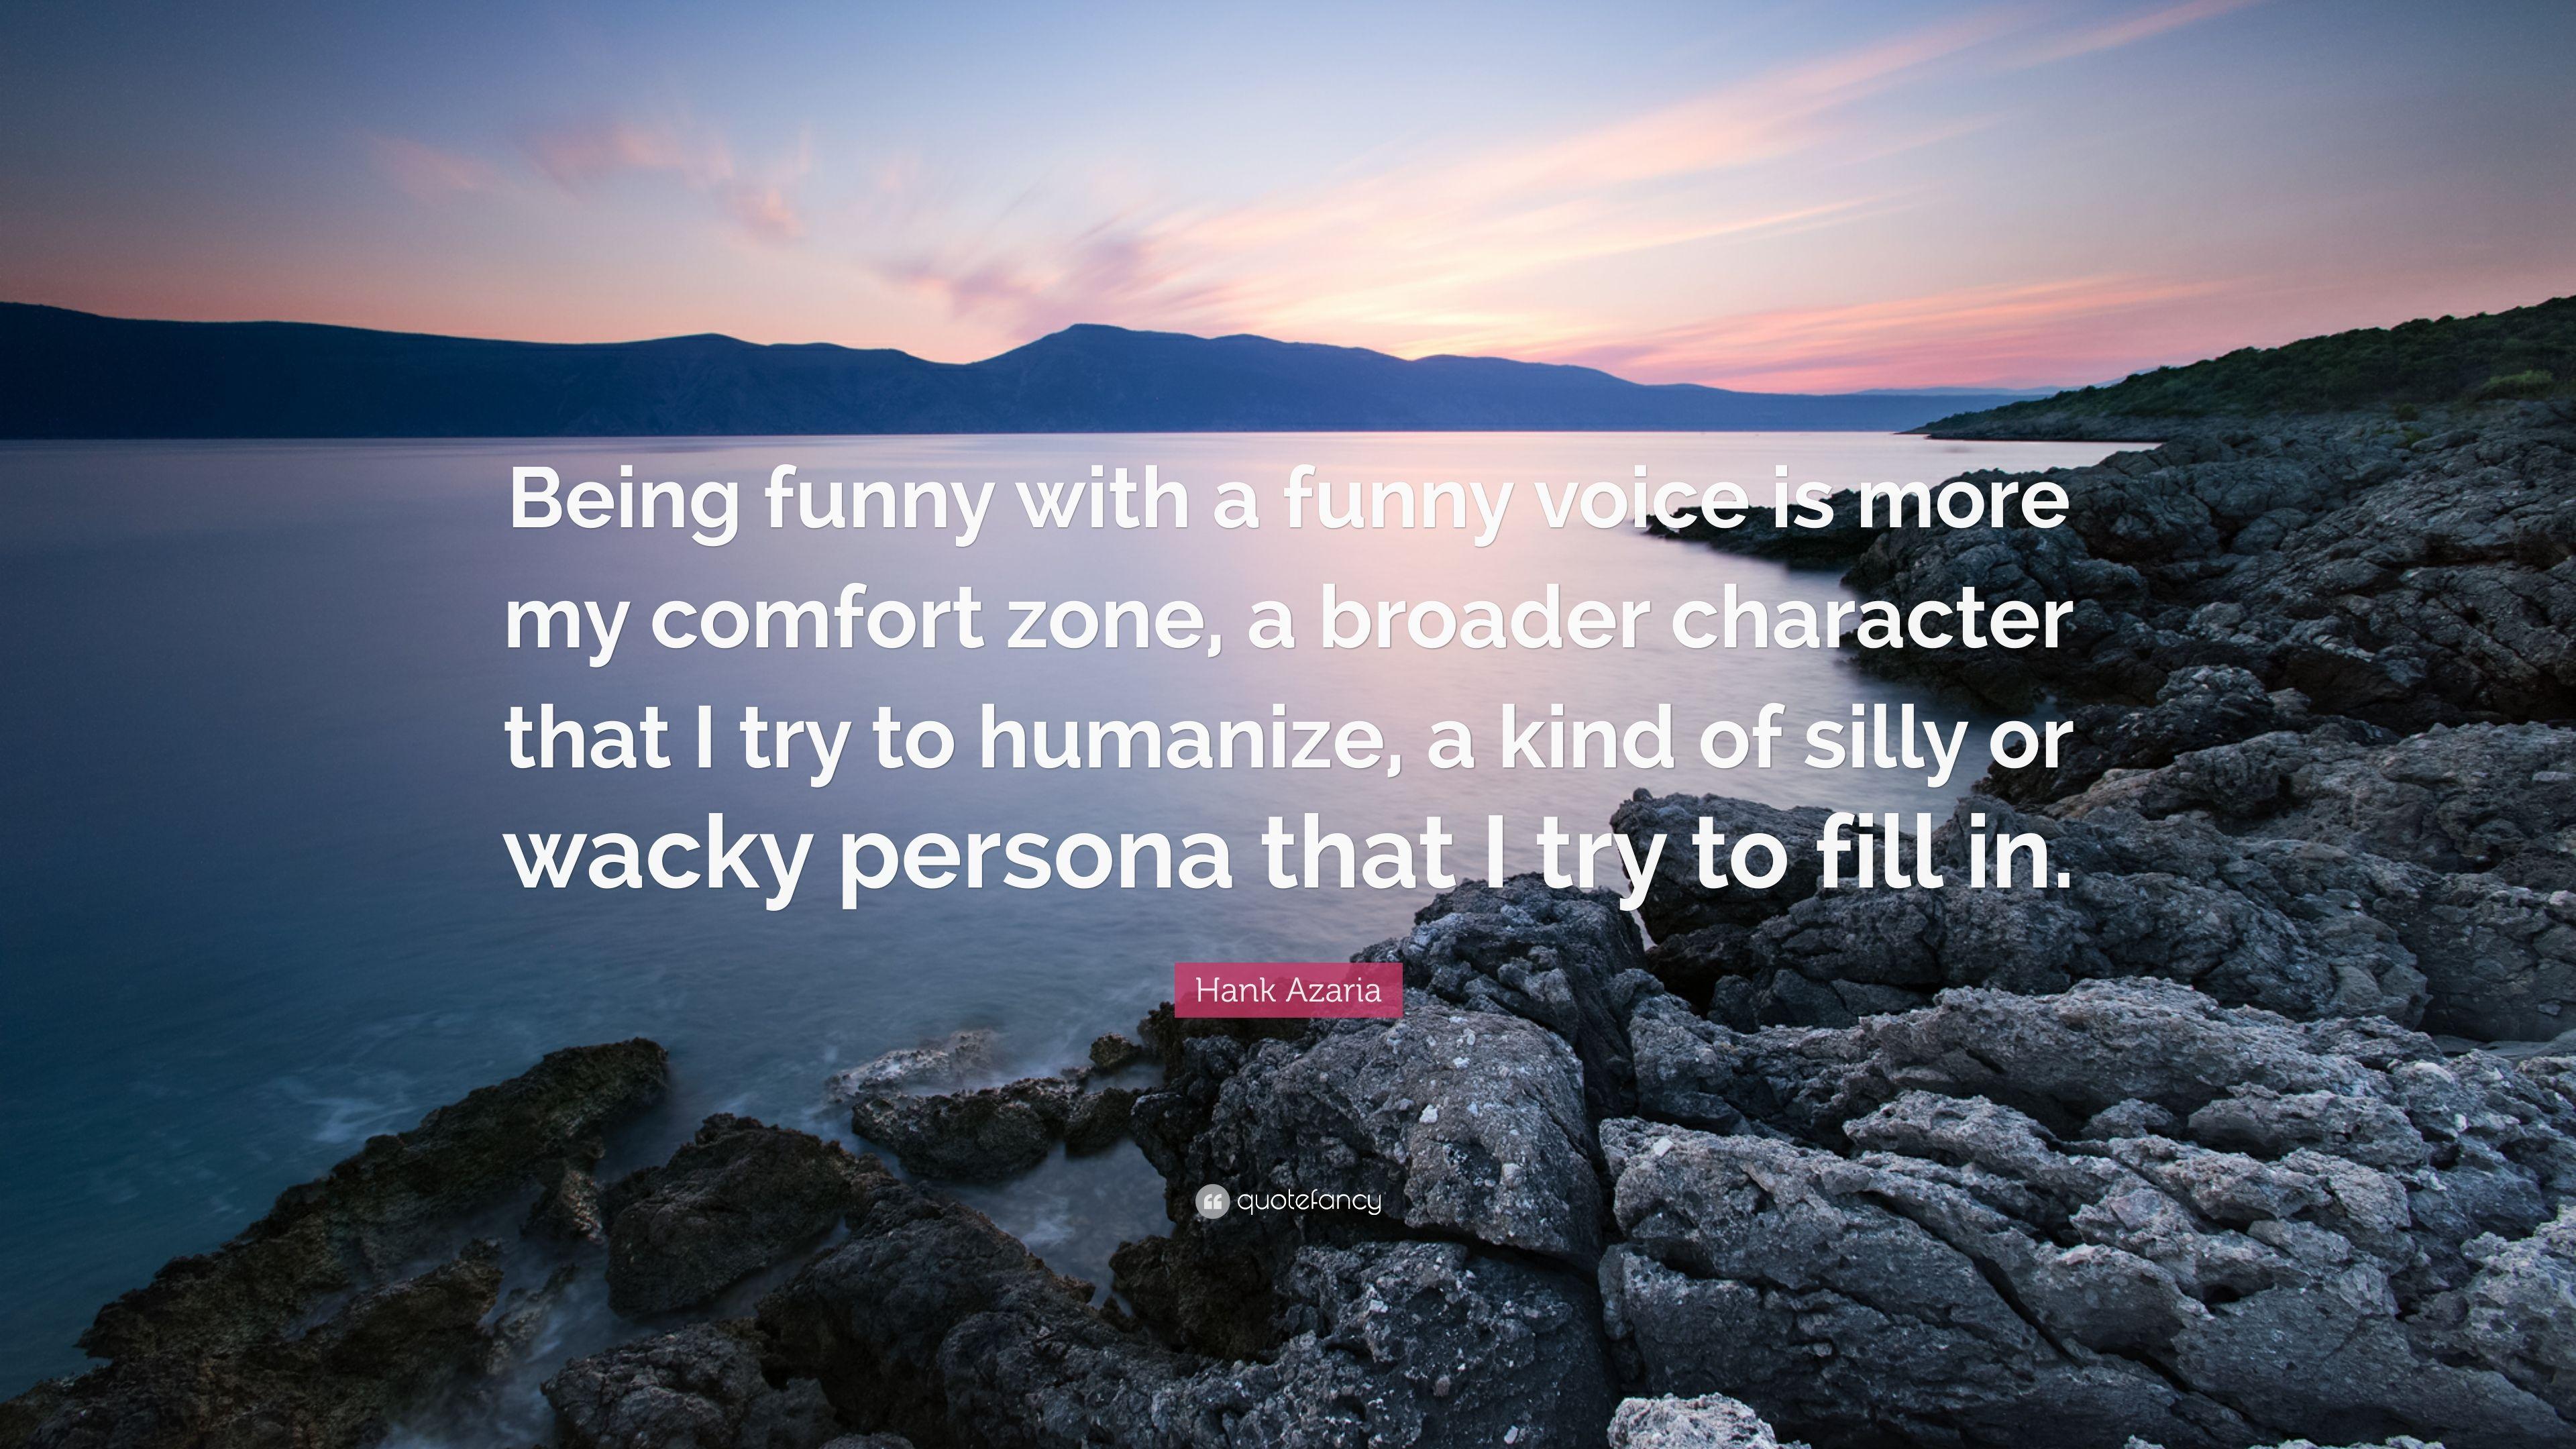 Hank Azaria Quote: “Being funny with a funny voice is more my